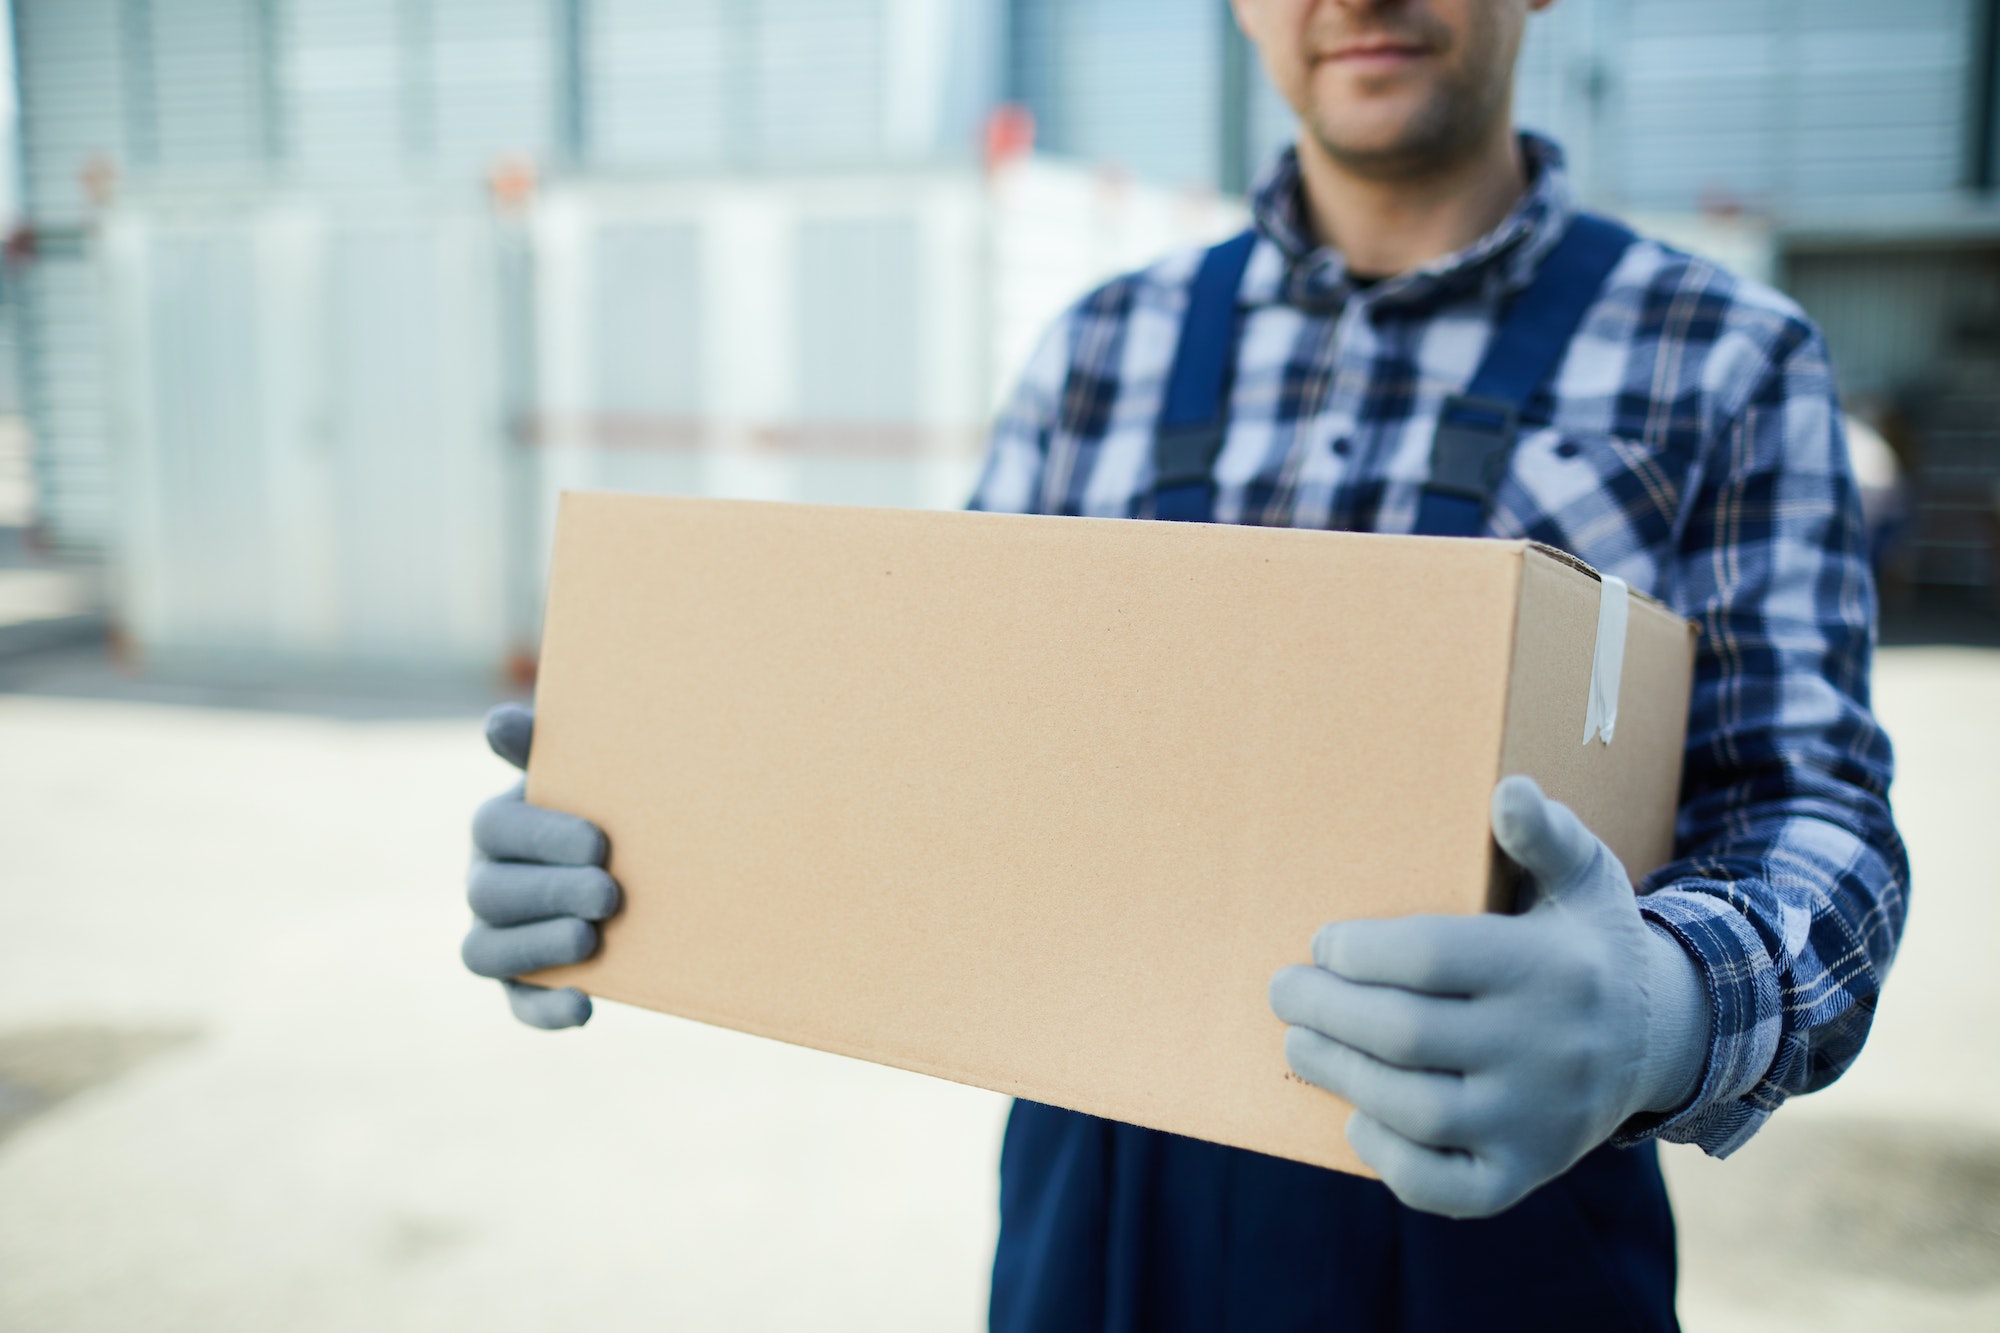 Moving company worker with box